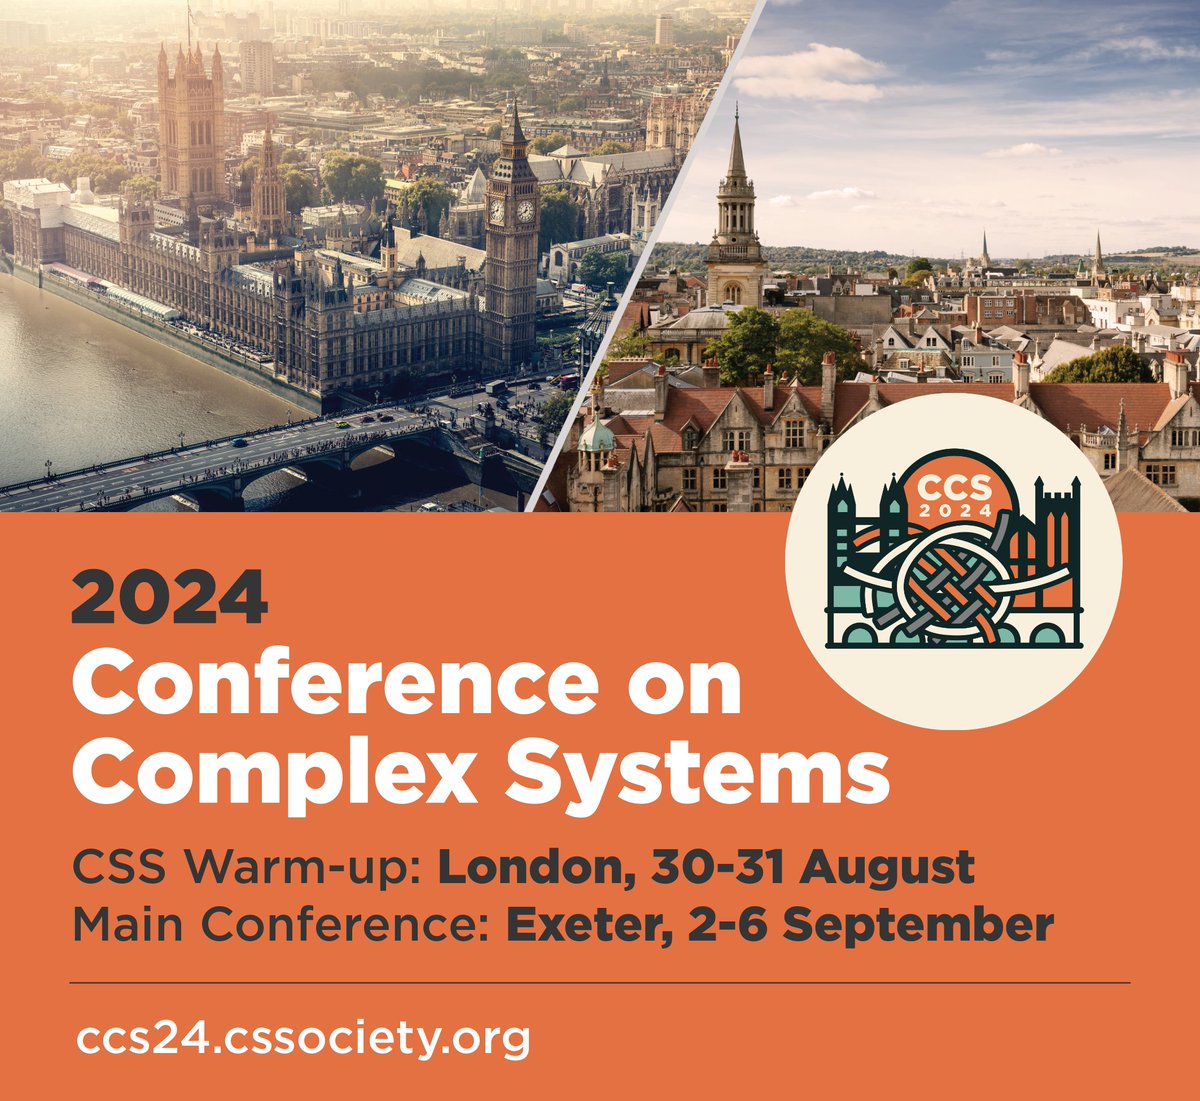 Join us @ConfCompSys2nd 2nd Sept 2024 in #Exeter
The AI4CI satellite workshop promises to bring together researchers working to leverage complexity science for achieving collective intelligence. Tap👉 bit.ly/3Ug69JH for more info on this event, and get involved! #ai4ci